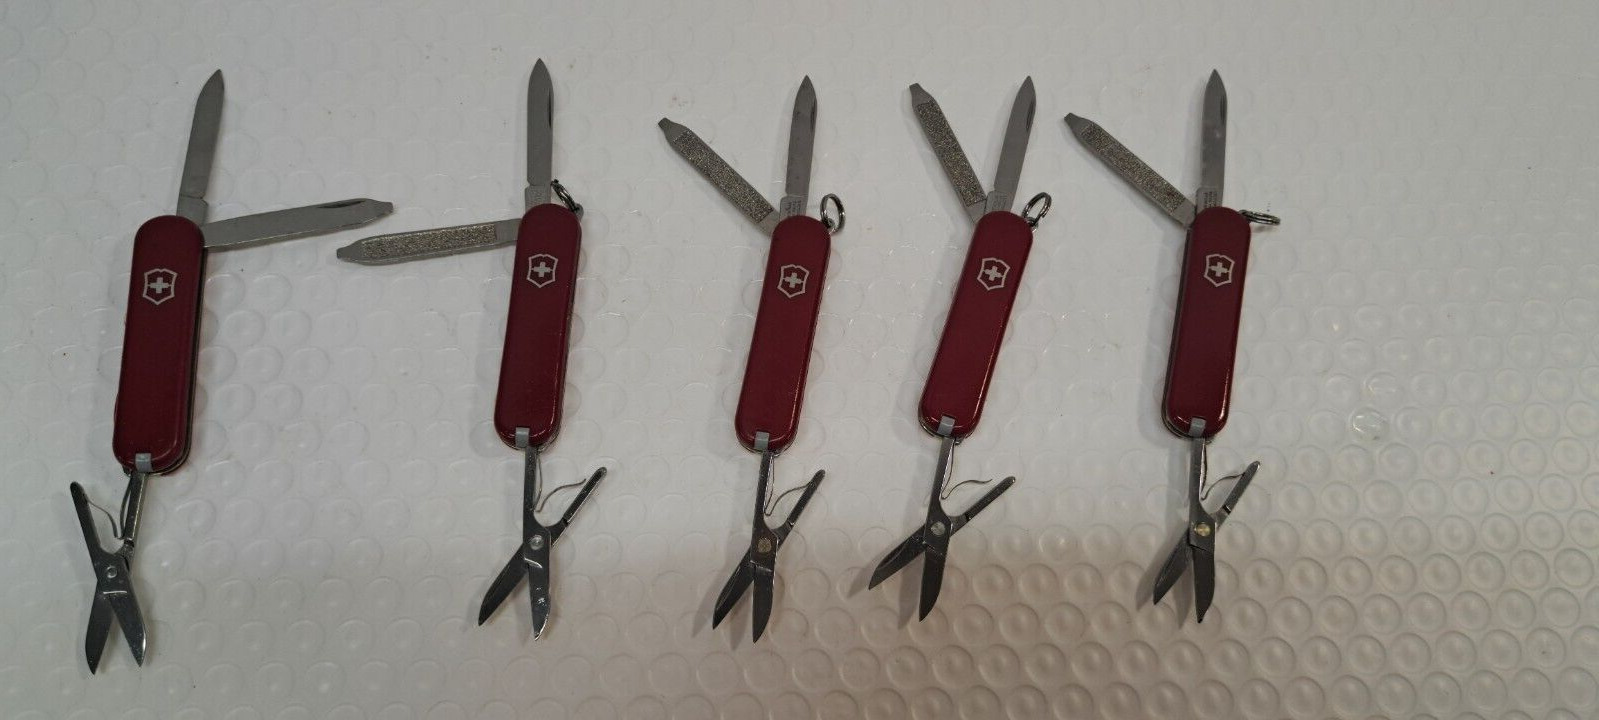 Lot of 5 Victorinox Classic Swiss Army Knives - Red actual lot pictured